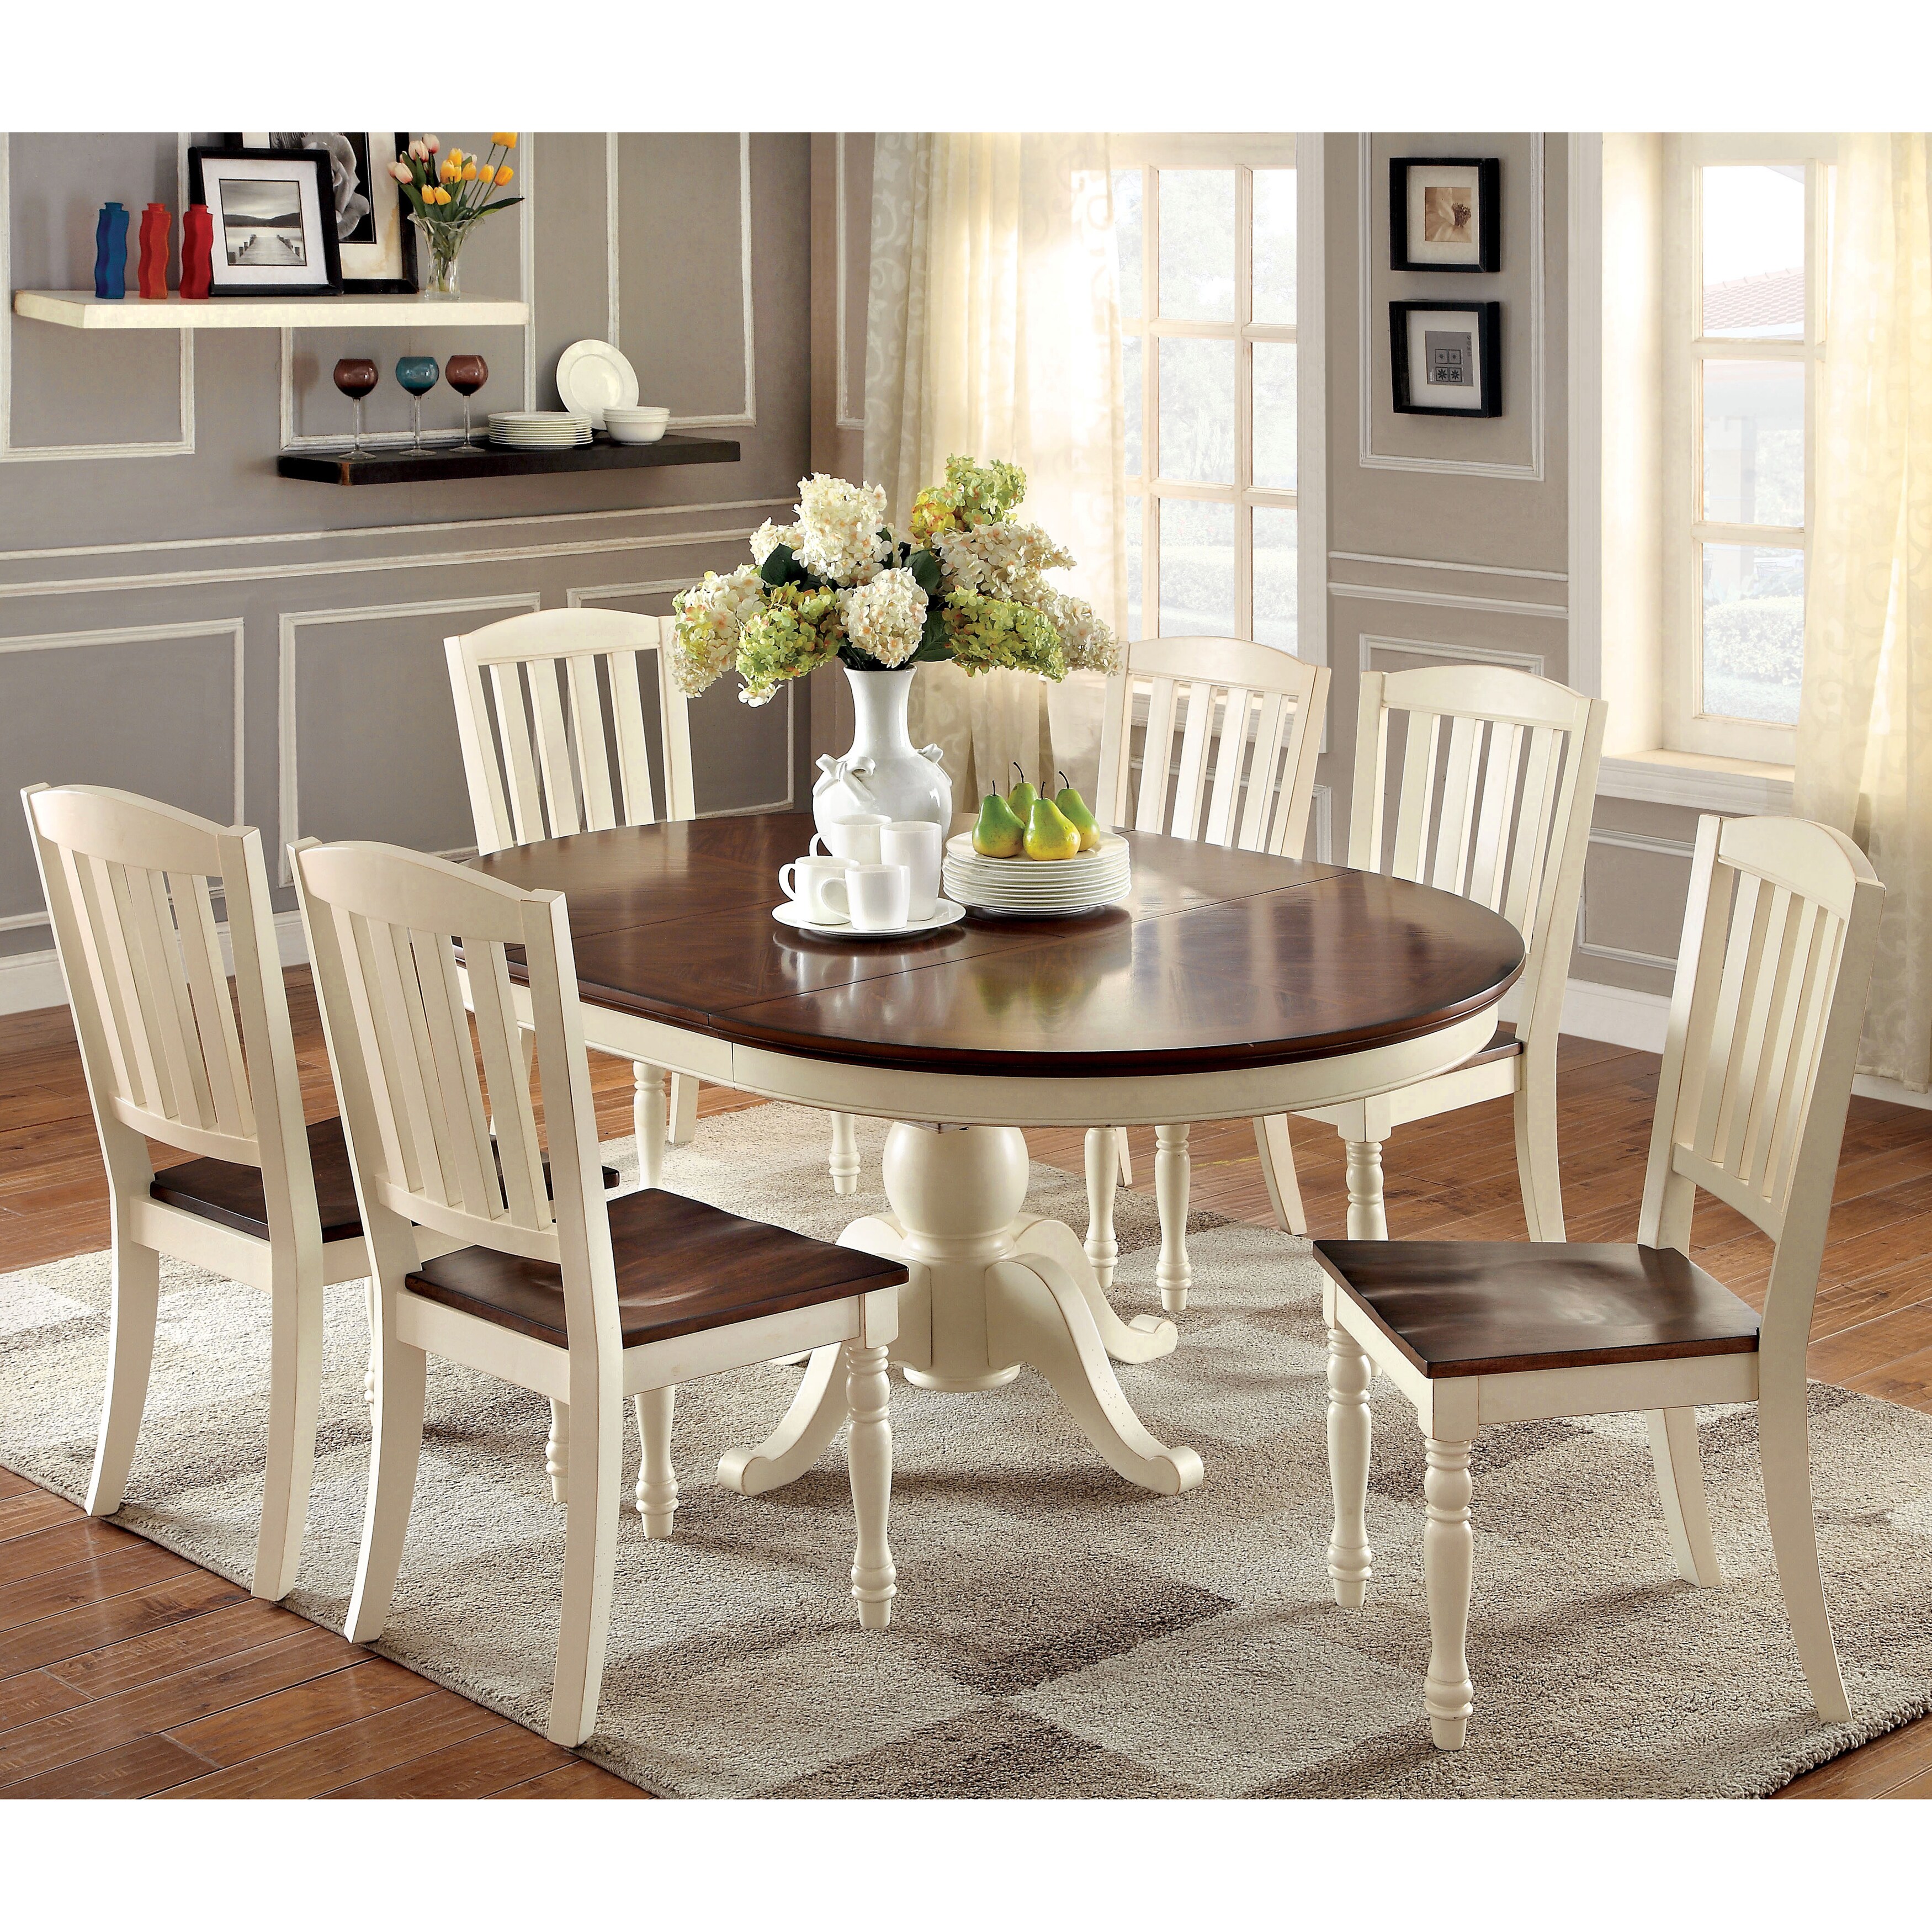 Shop Furniture Of America Bethannie Cottage Style 2 Tone Dining